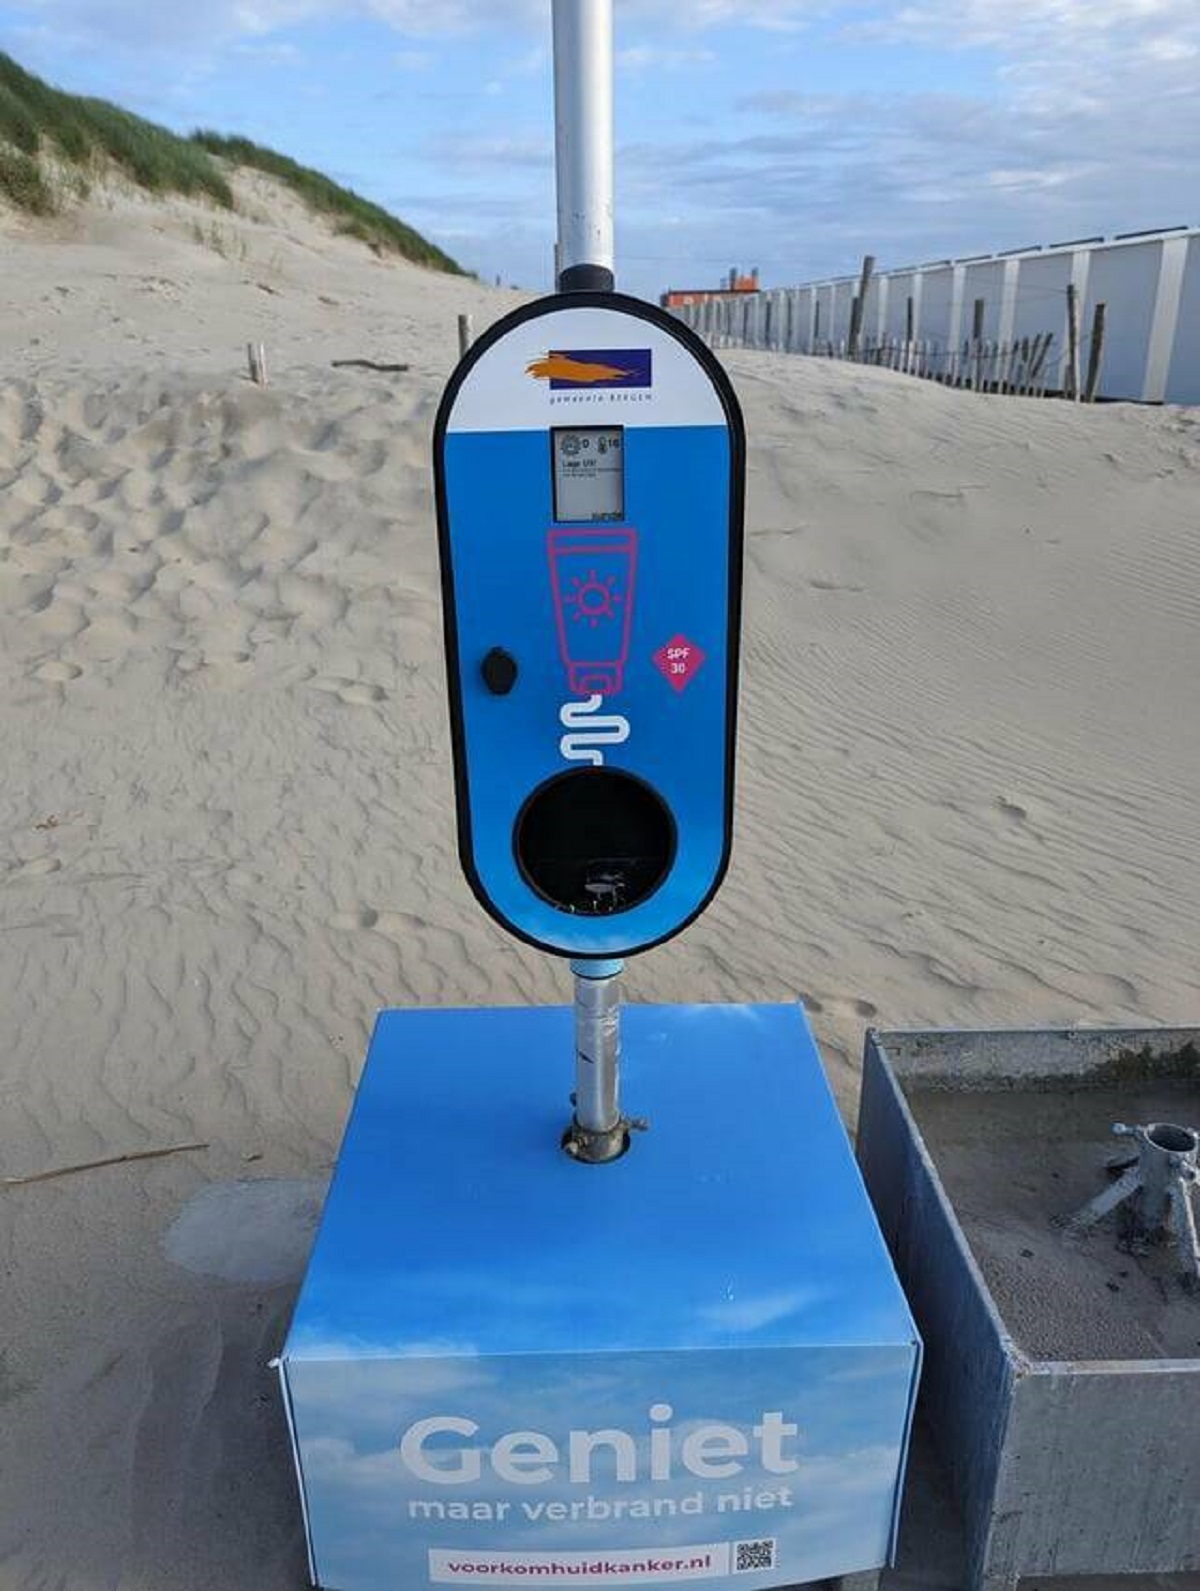 "The beaches here in the Netherlands have free sunscreen dispensers"